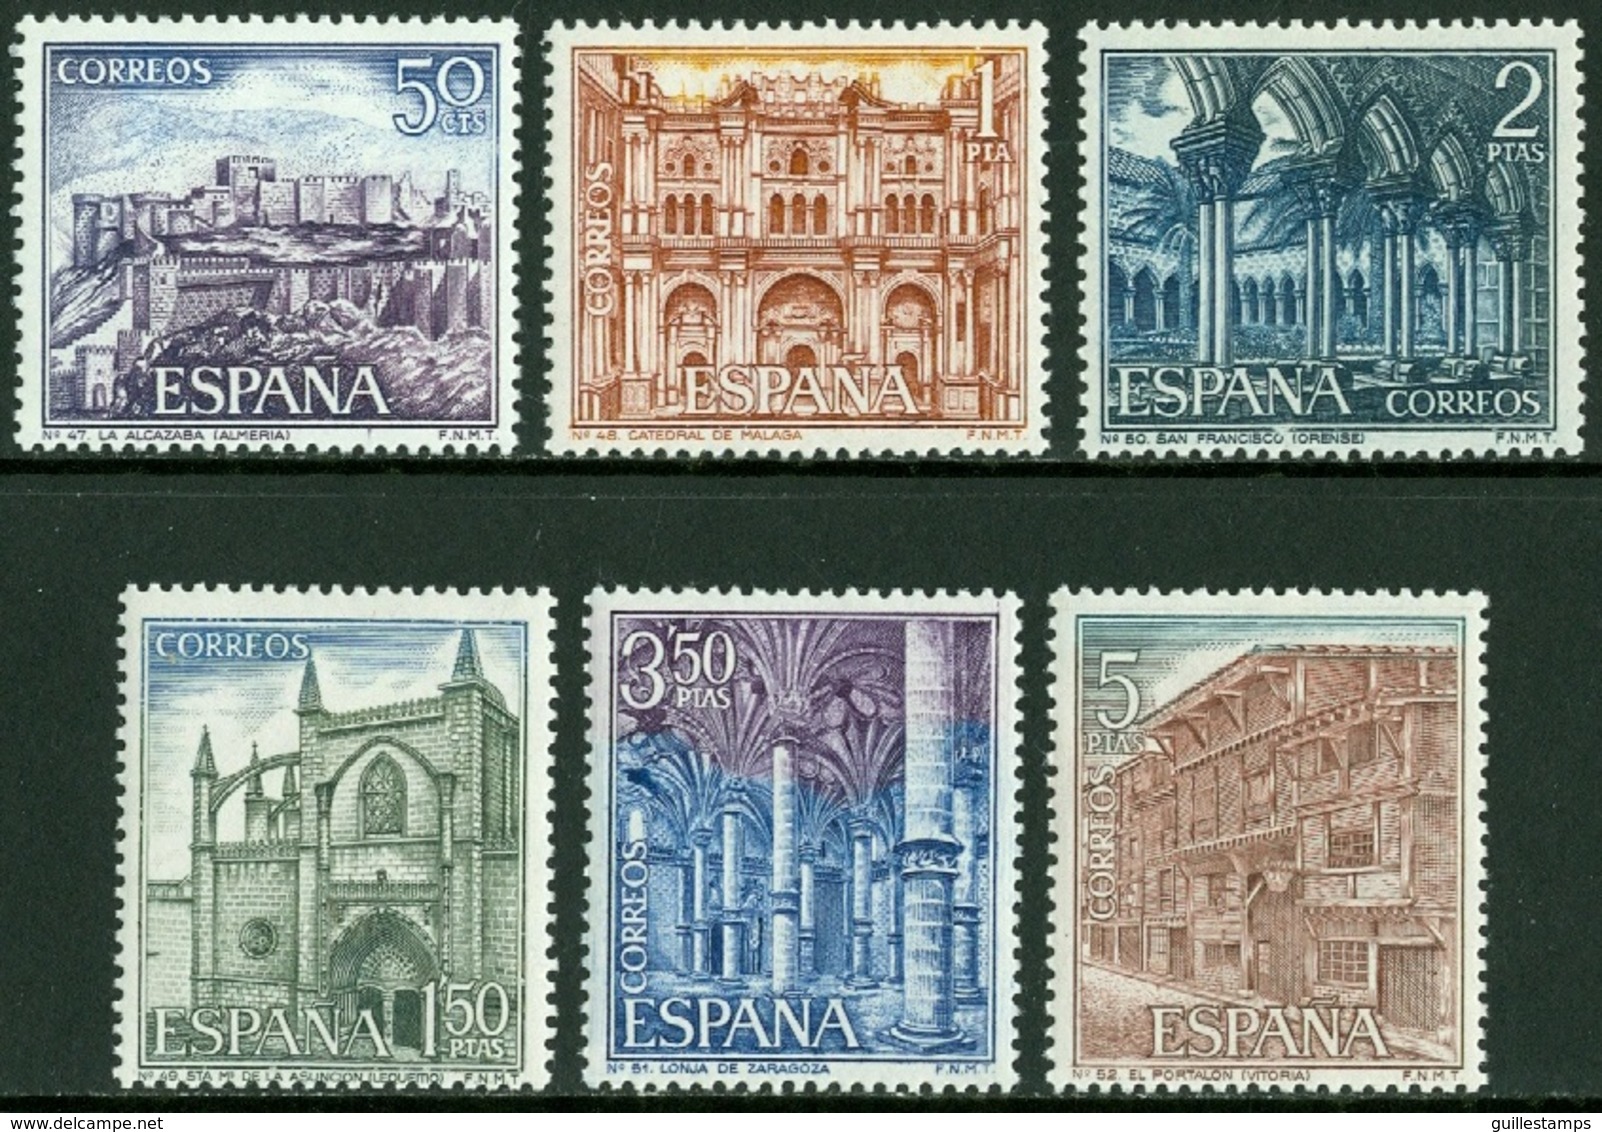 SPAIN 1970 TOURISM** (MNH) - Unused Stamps